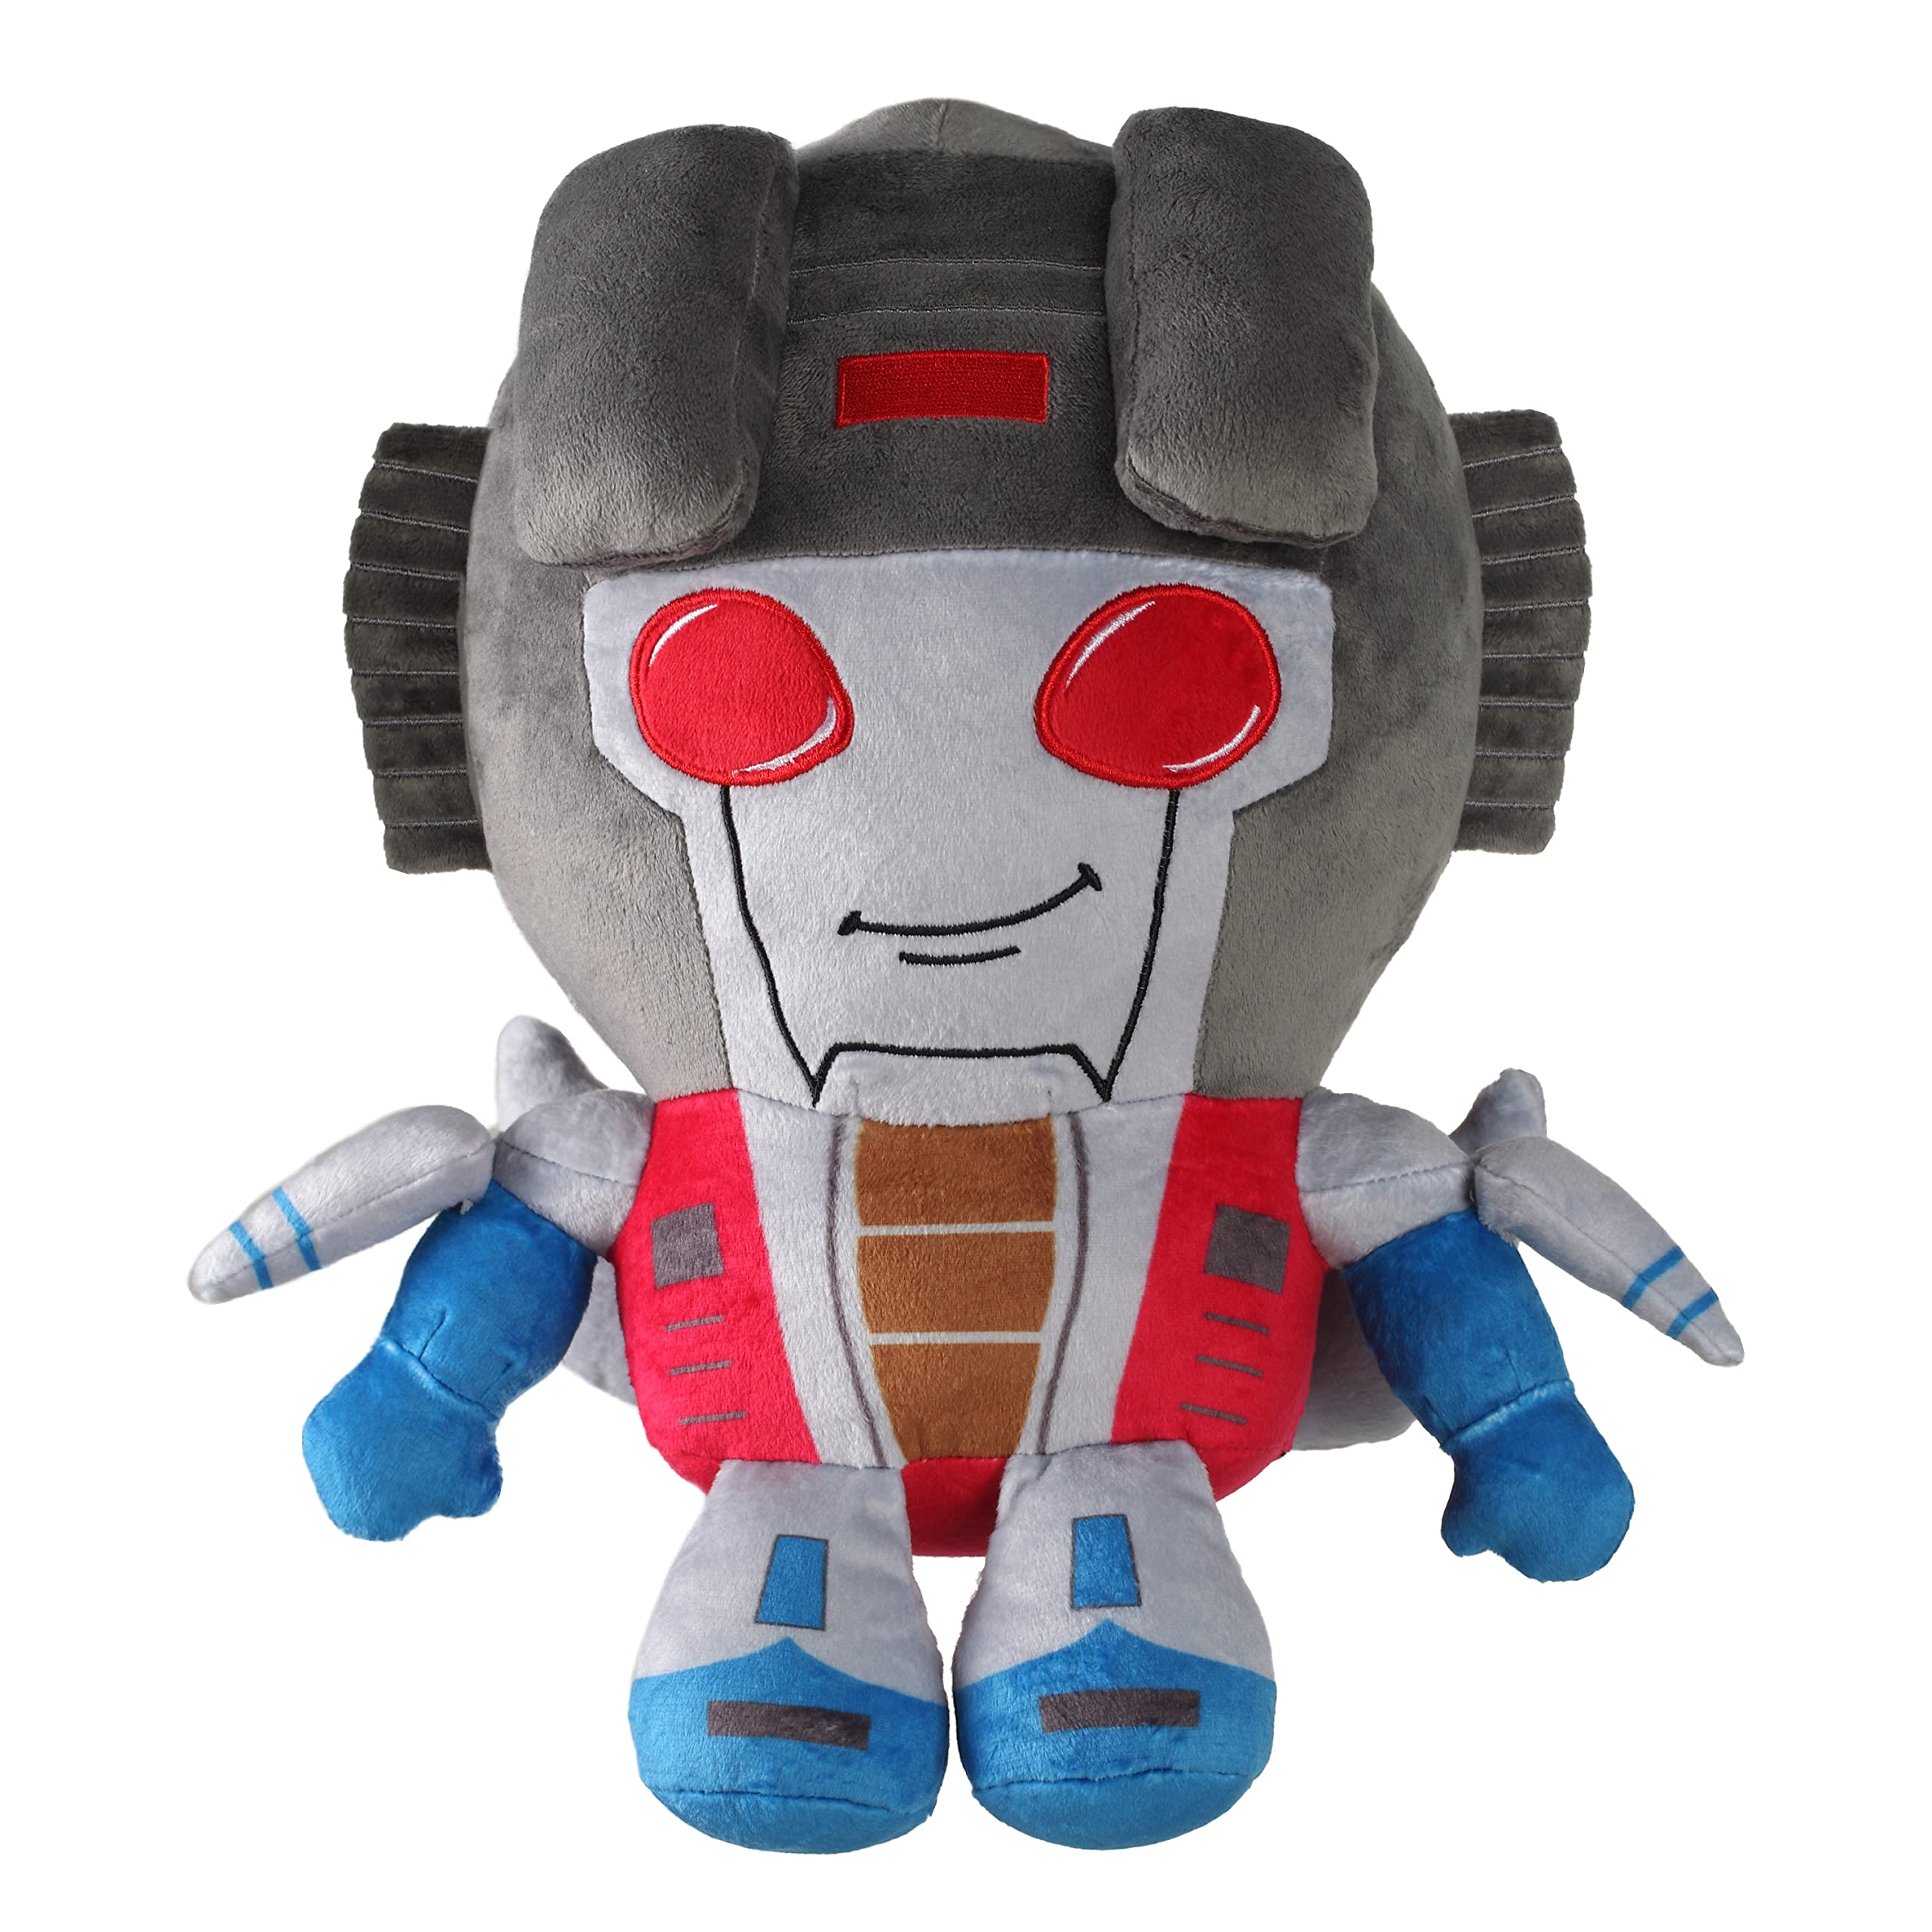 Symbiote Studios Transformers  Starscream Plush Toy  12 Inch Soft Minky Plush Fabric  Officially Licensed Product  Ages 3+